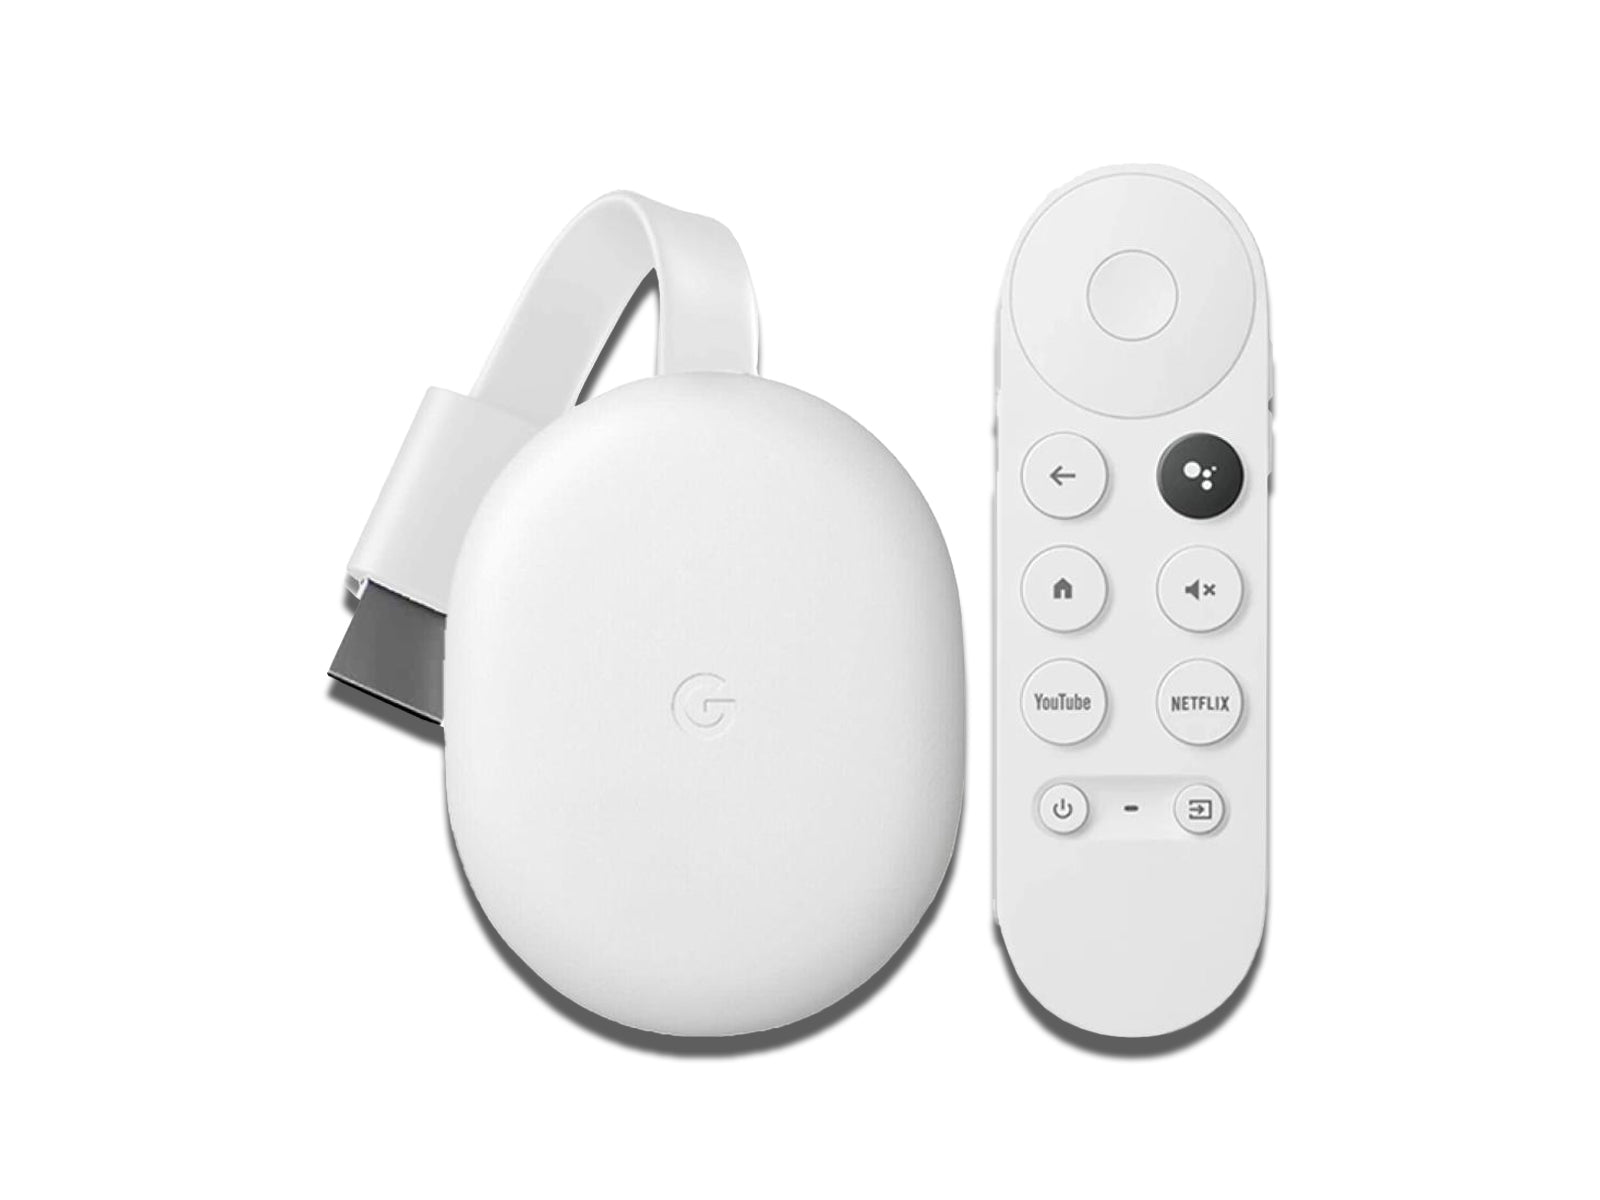 Close up image of the chrome cast and remote control on the white background